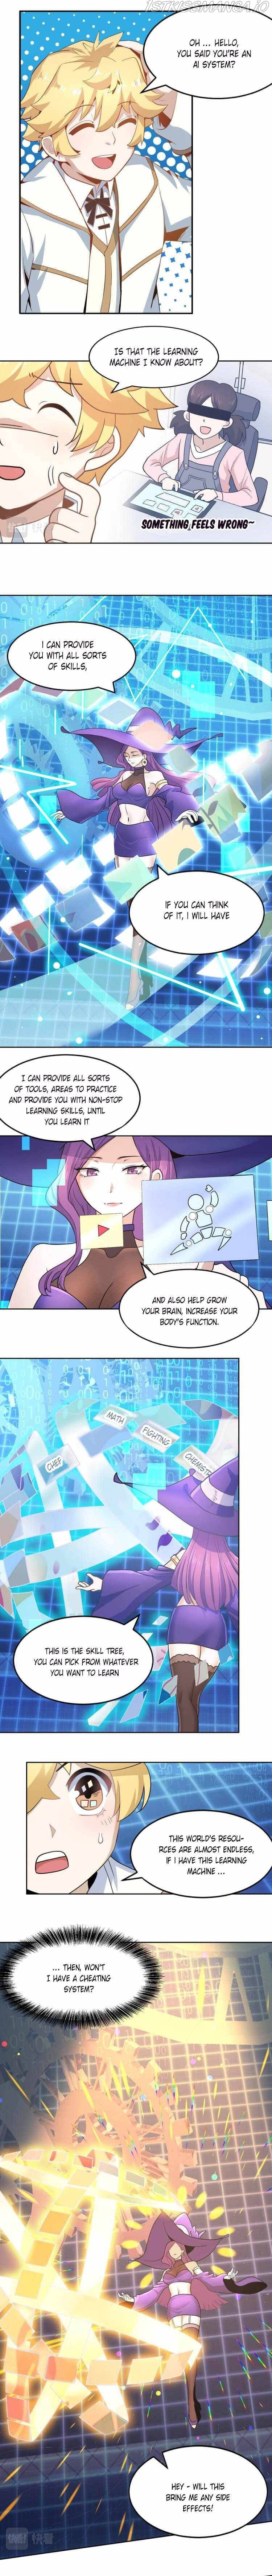 Learning Magic In Another World - Page 3